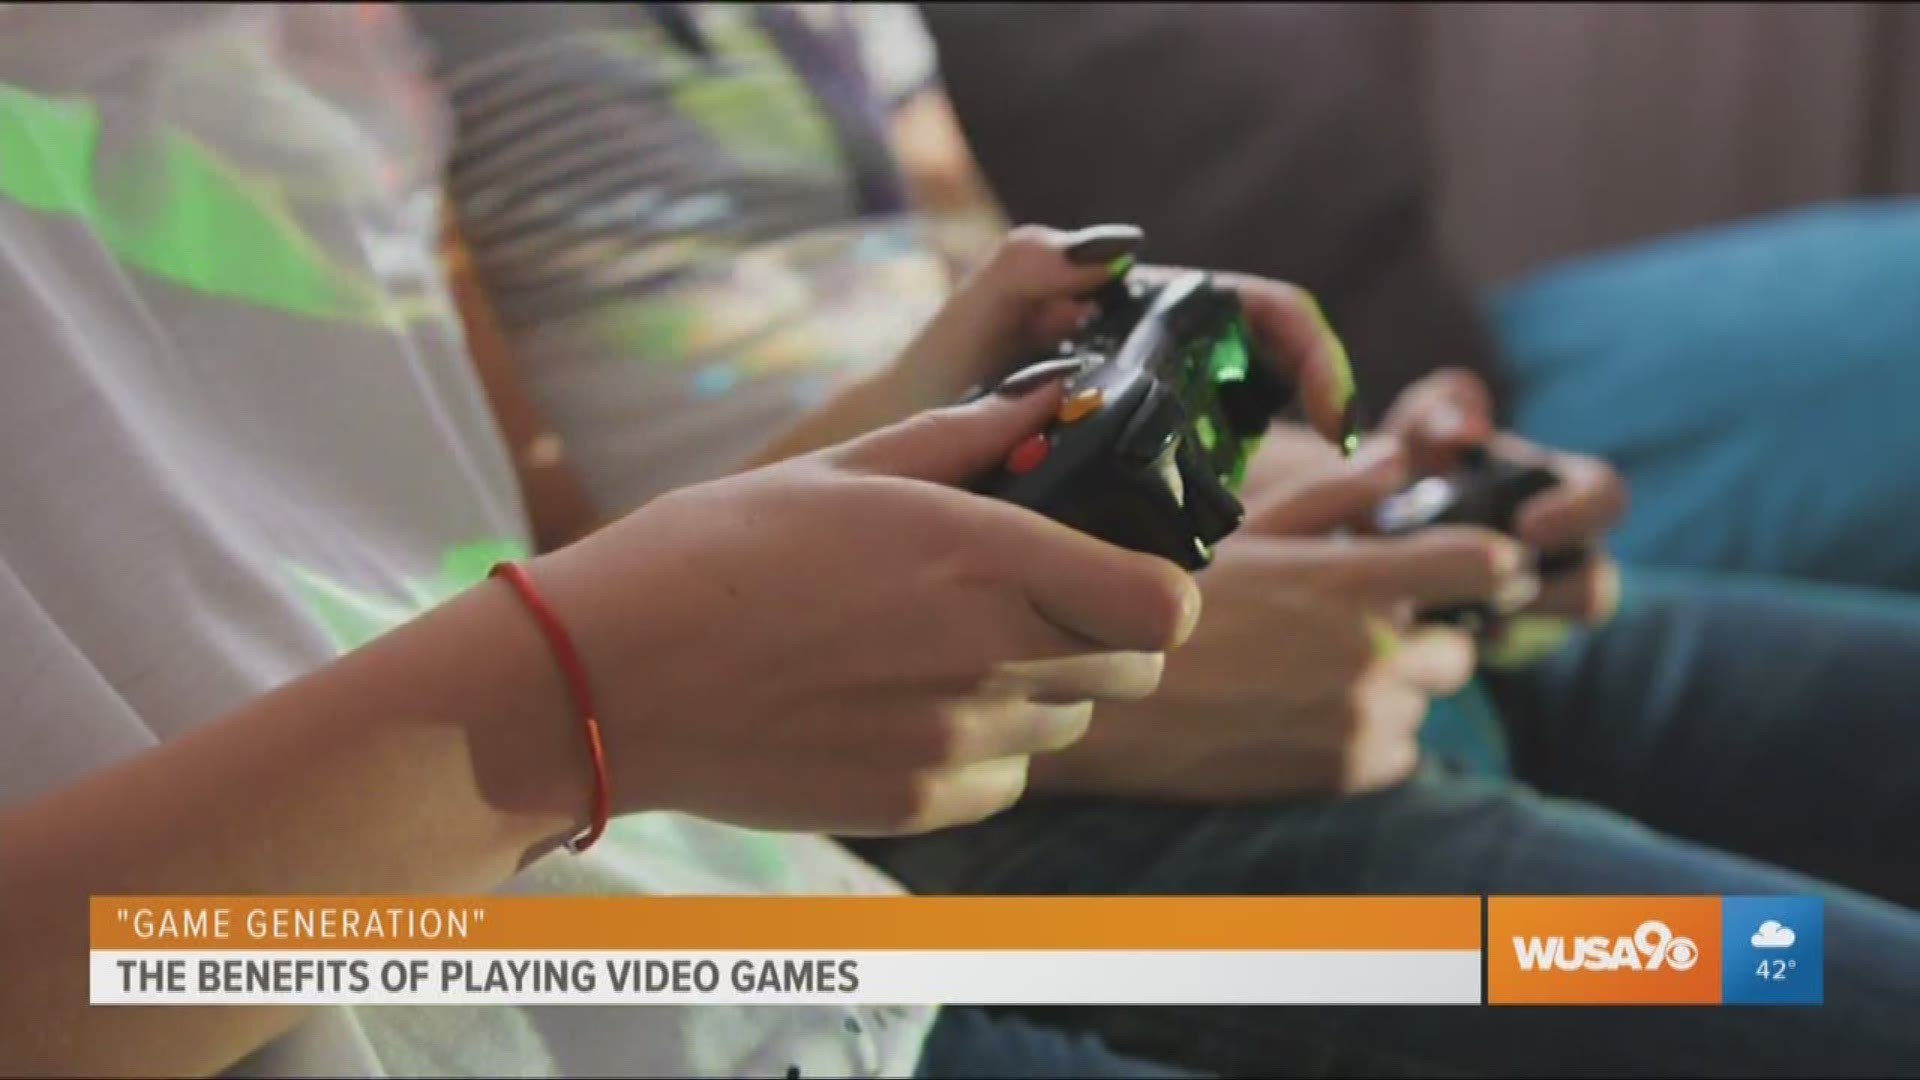 Stanley Pierre-Louis, Pres. & CEO of the Entertainment Software Association shares the positive benefits of playing video games. This segment is sponsored by ESA.